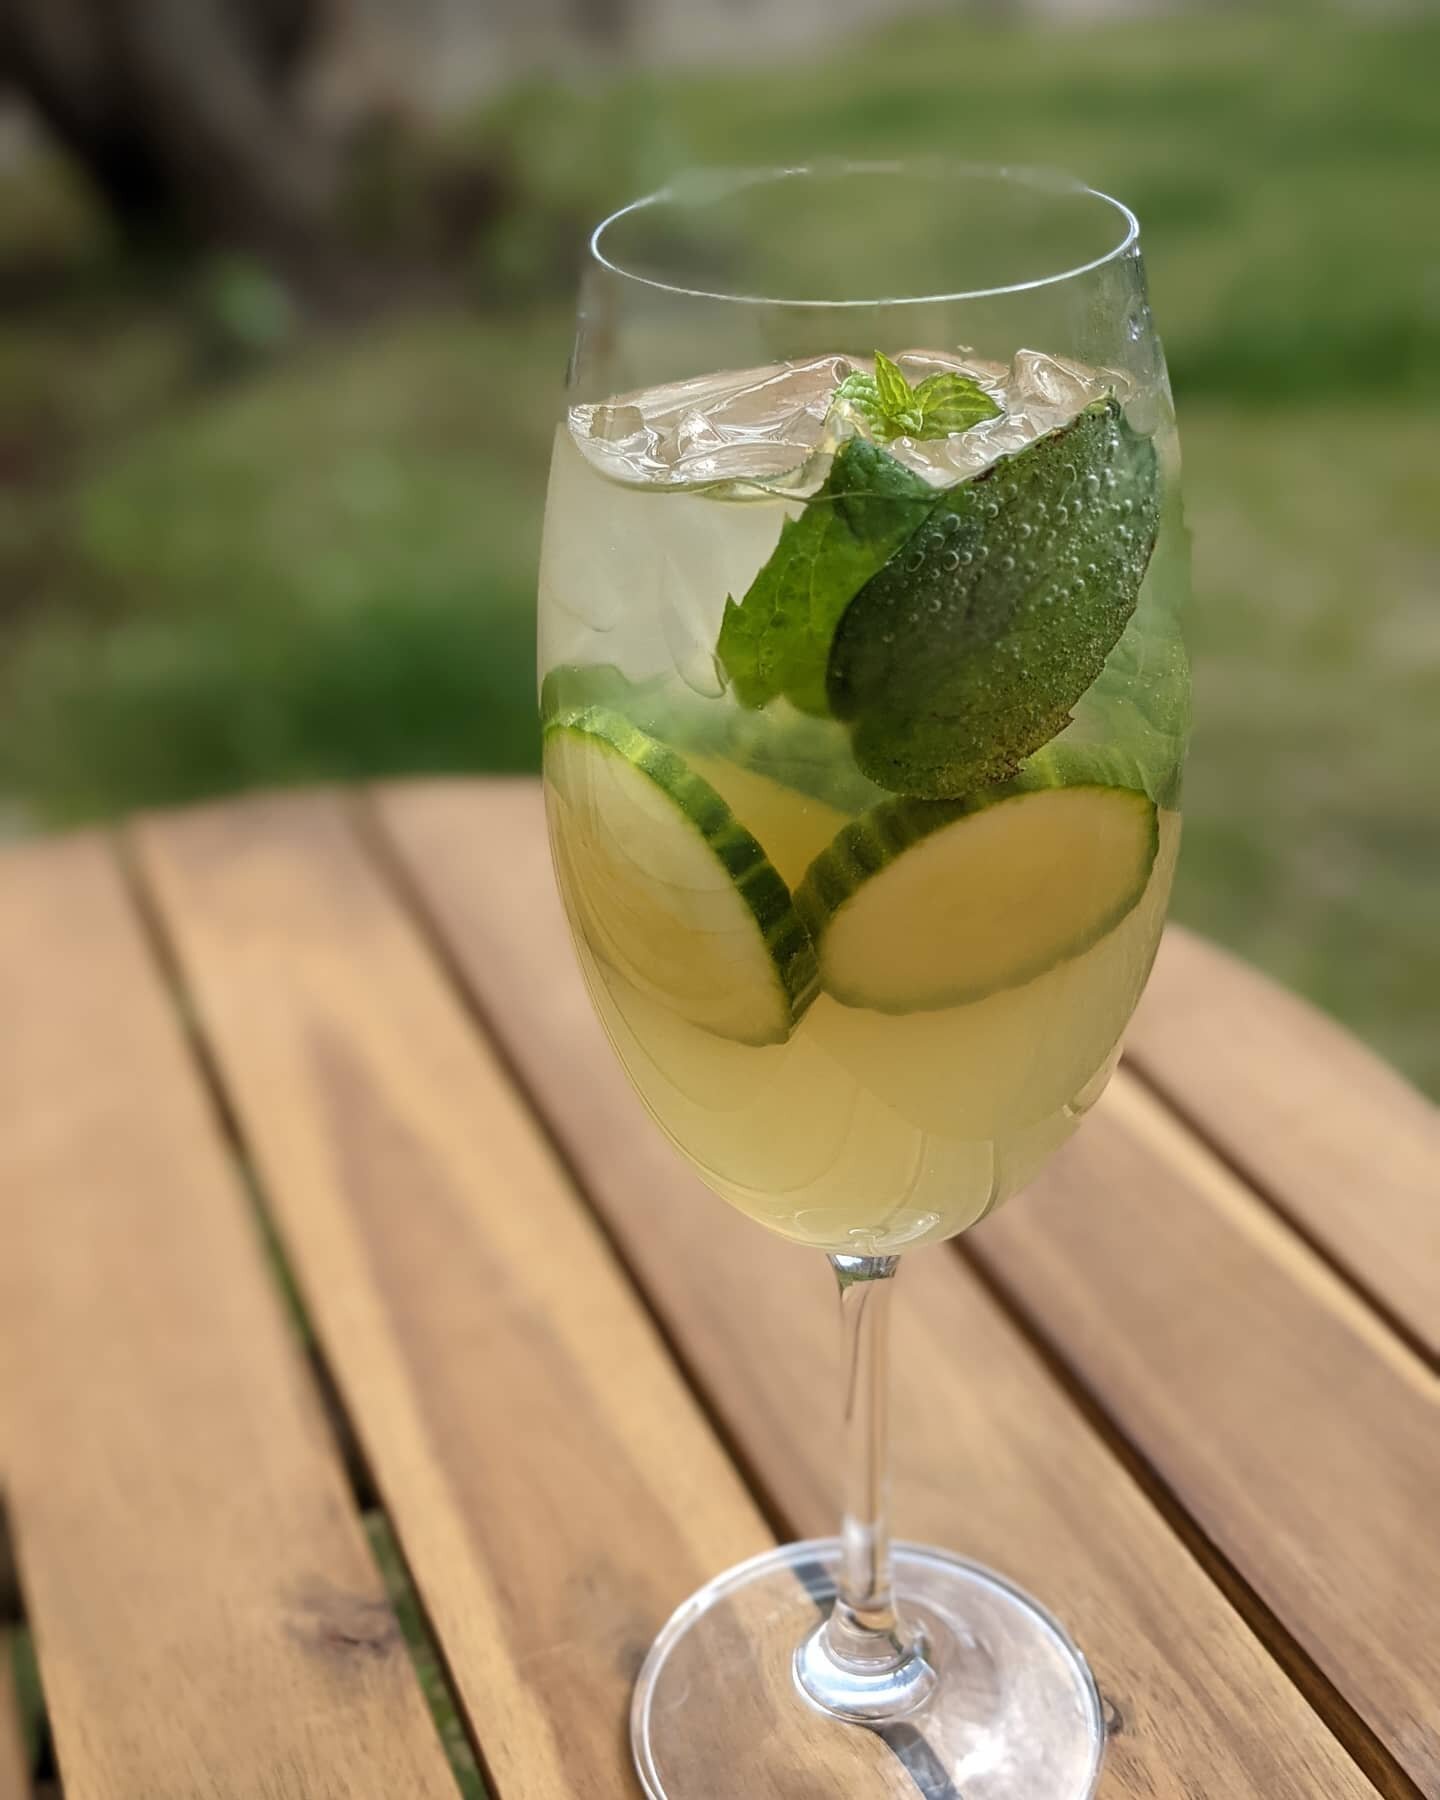 Fun fact: You should always smack your mint instead of muddling it. By muddling you not only bruise it but you release a bitter flavor from the leaves breaking down. 

Ft. Cucumber mojito that just might motivate me to cut my grass today. 

Recipe
2 